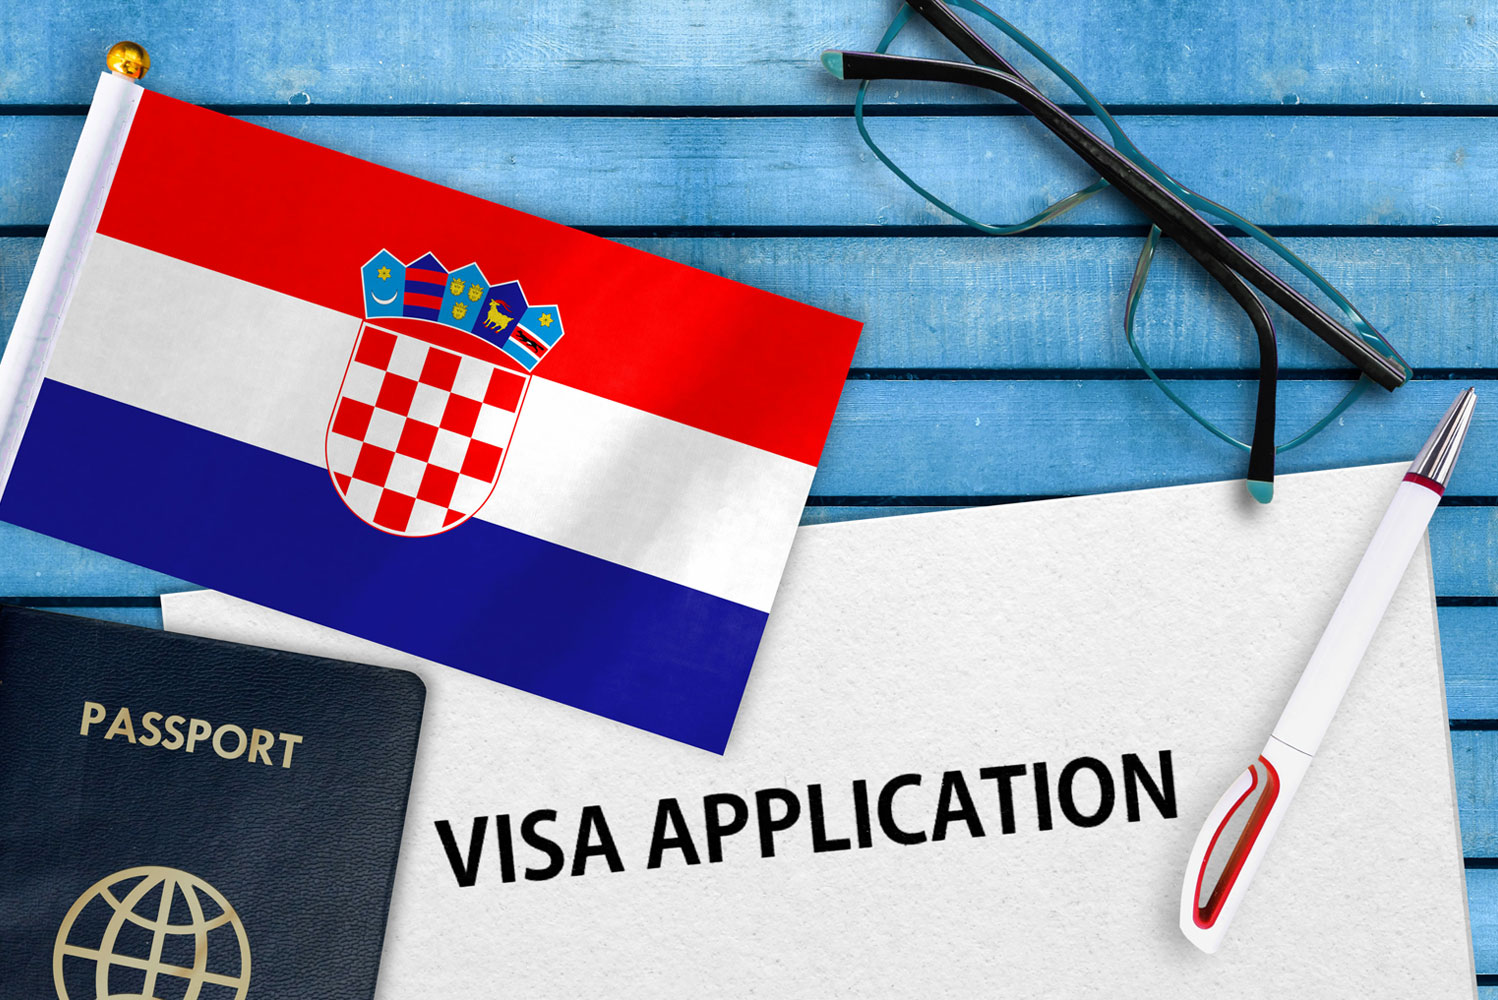 How to enter Croatia on a tourist visa in 2022